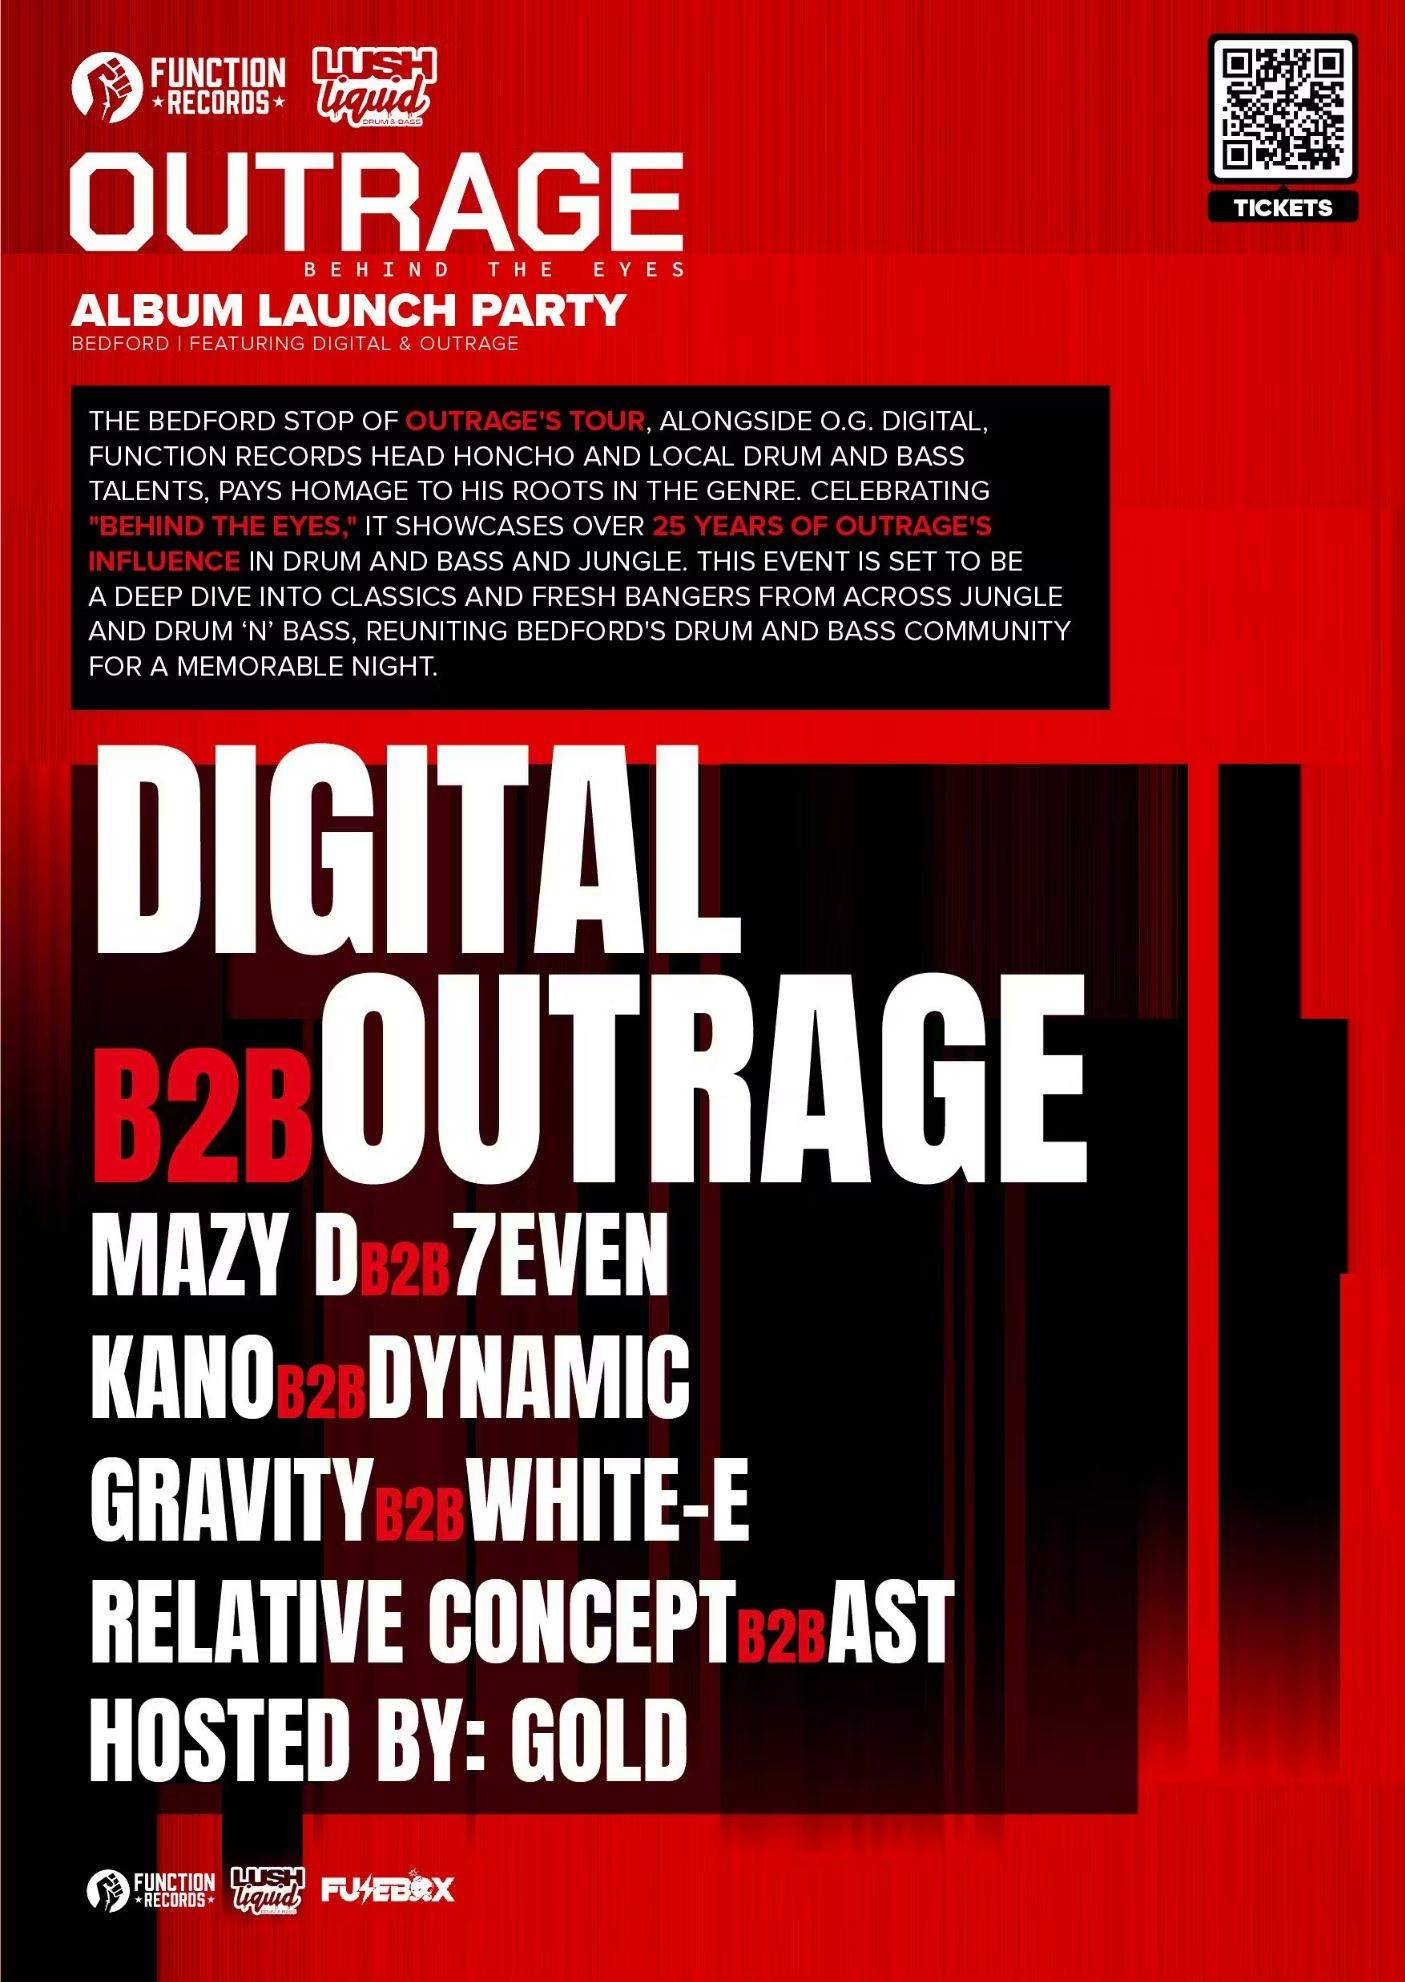 Outrage - Behind The Eyes: Album Launch Party - フライヤー表